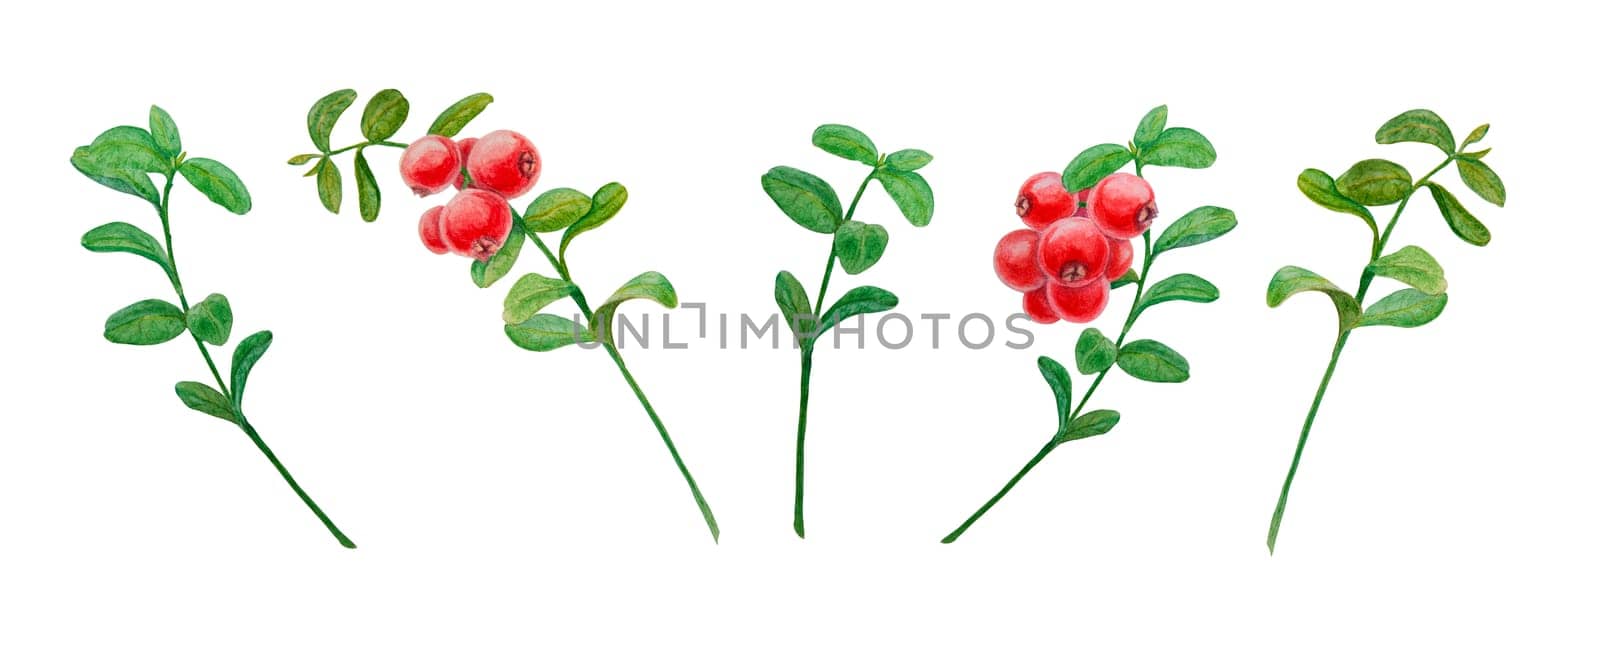 Wild red berries watercolor hand drawn botanical realistic illustration, clip art. Collection of forest cranberry, cowberry branches for printing on fabric, postcards, invitations, menus, packing by florainlove_art